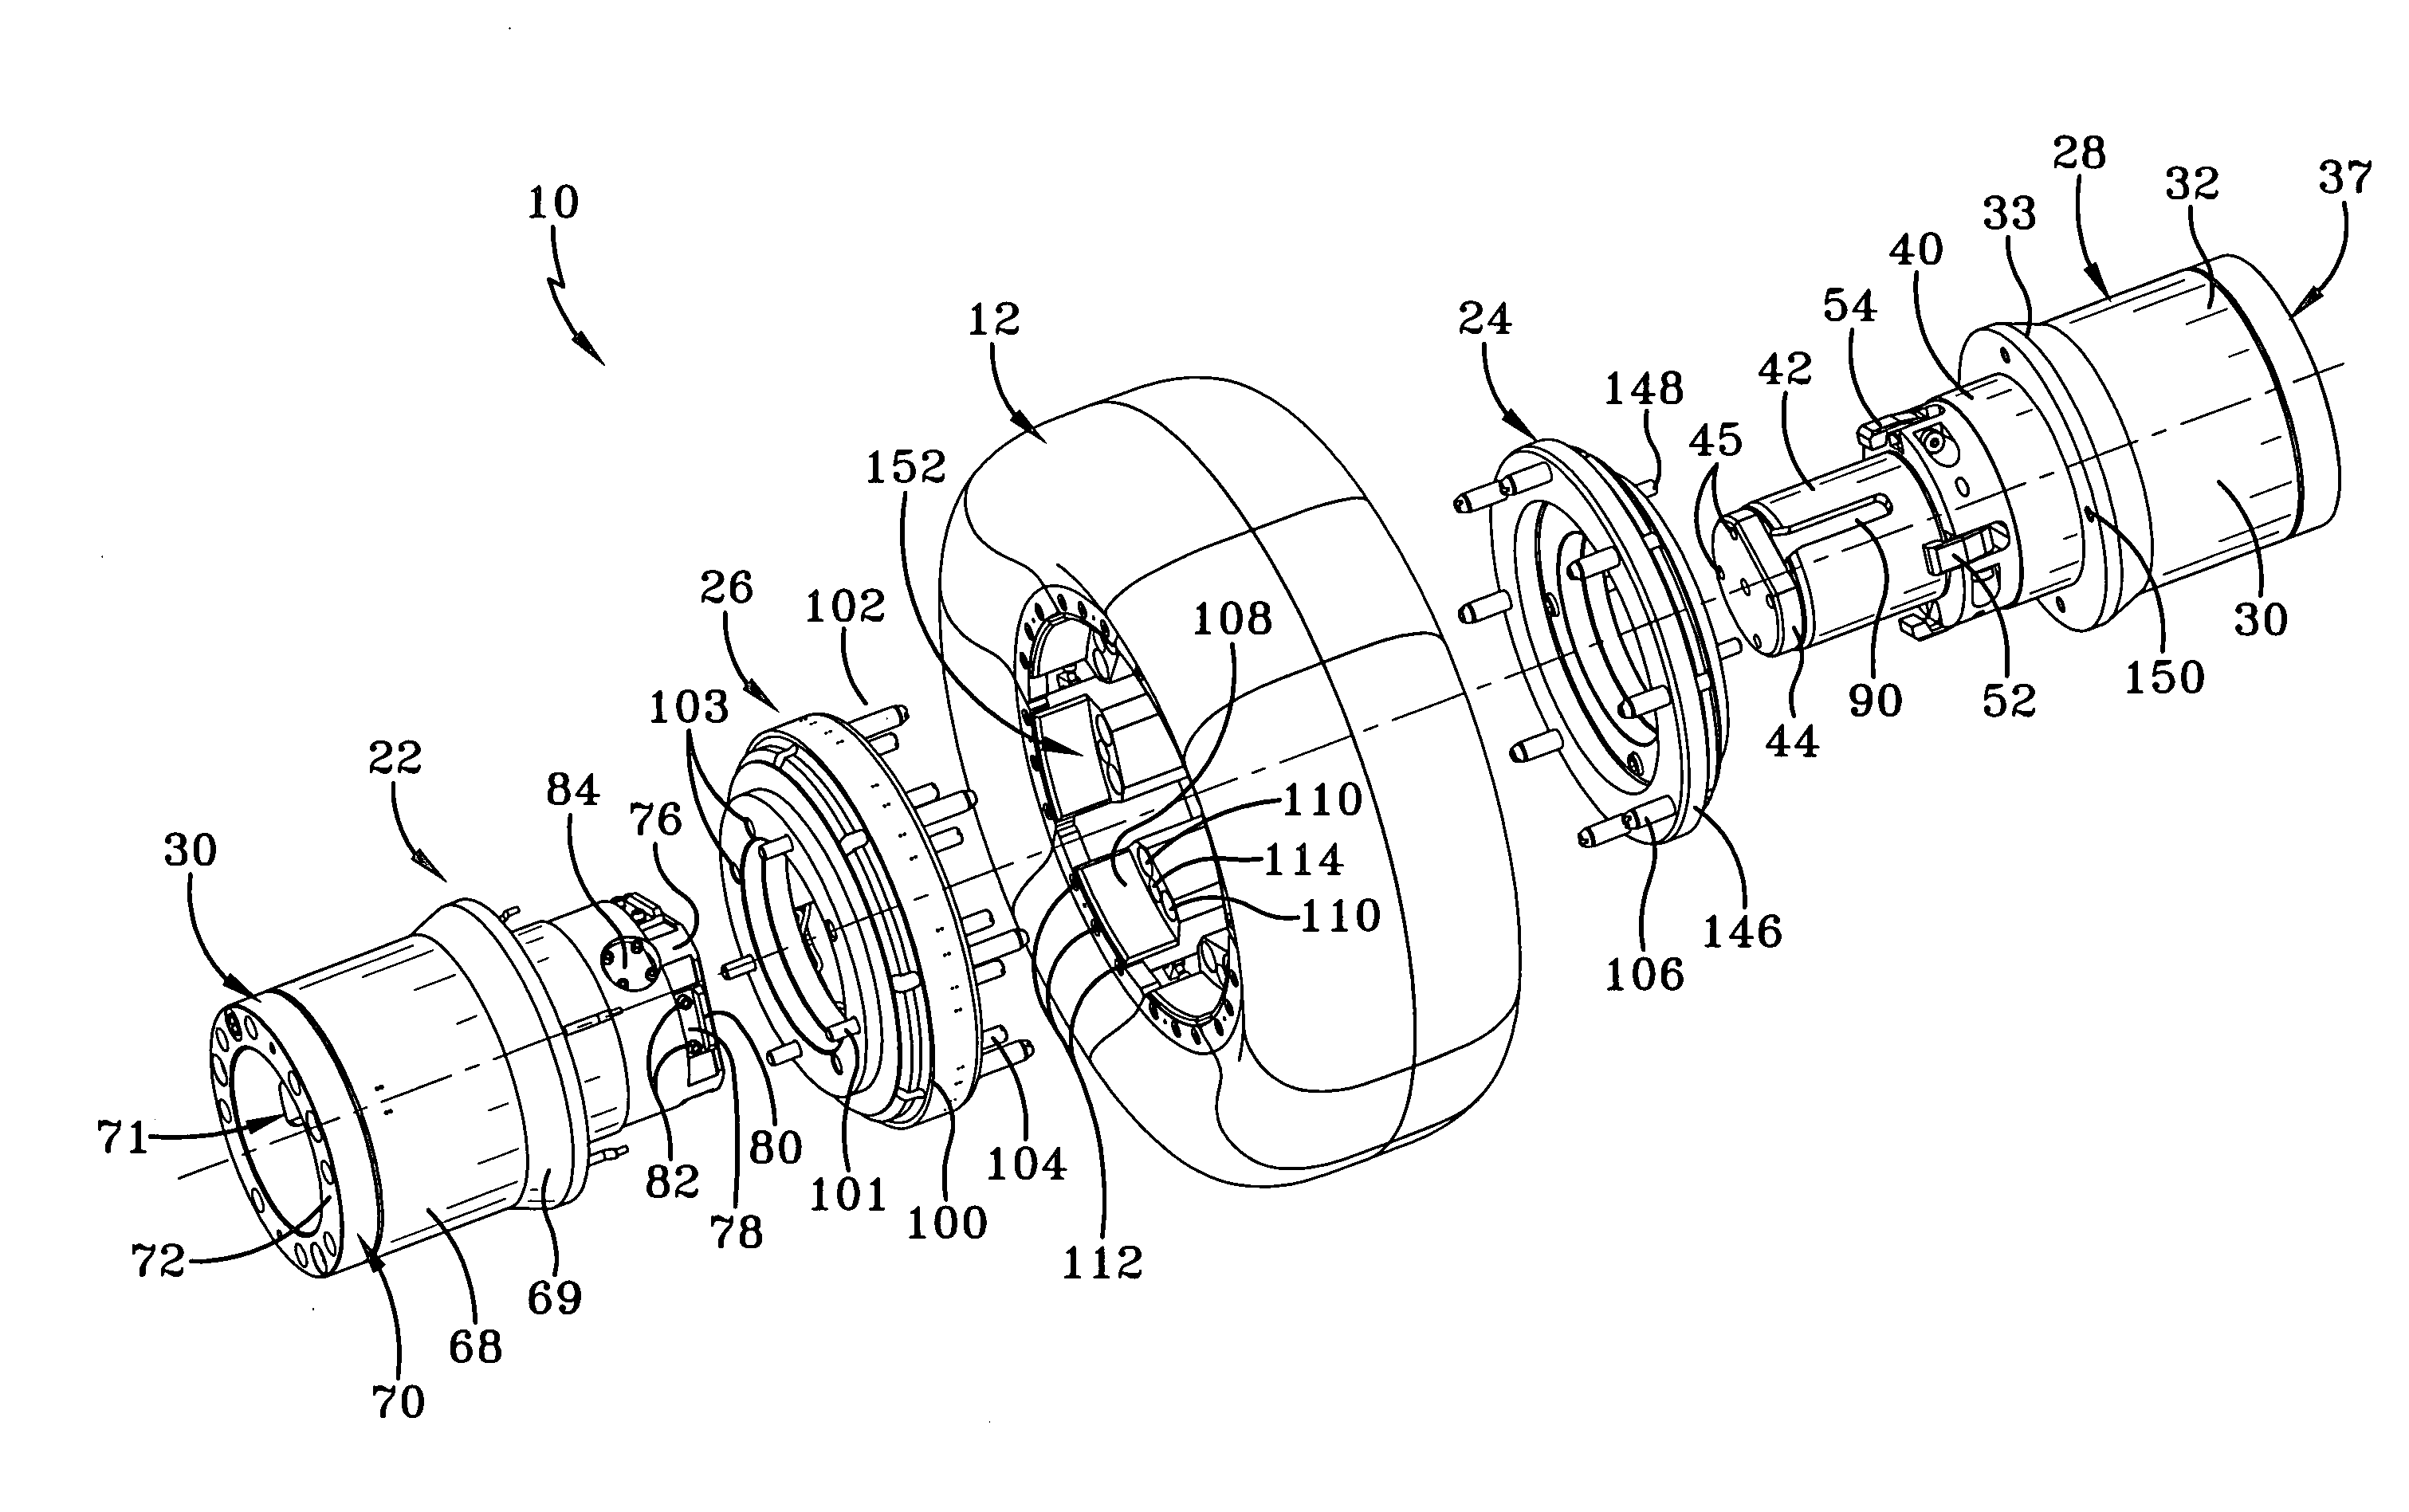 Tire building core latching and transport mechanism